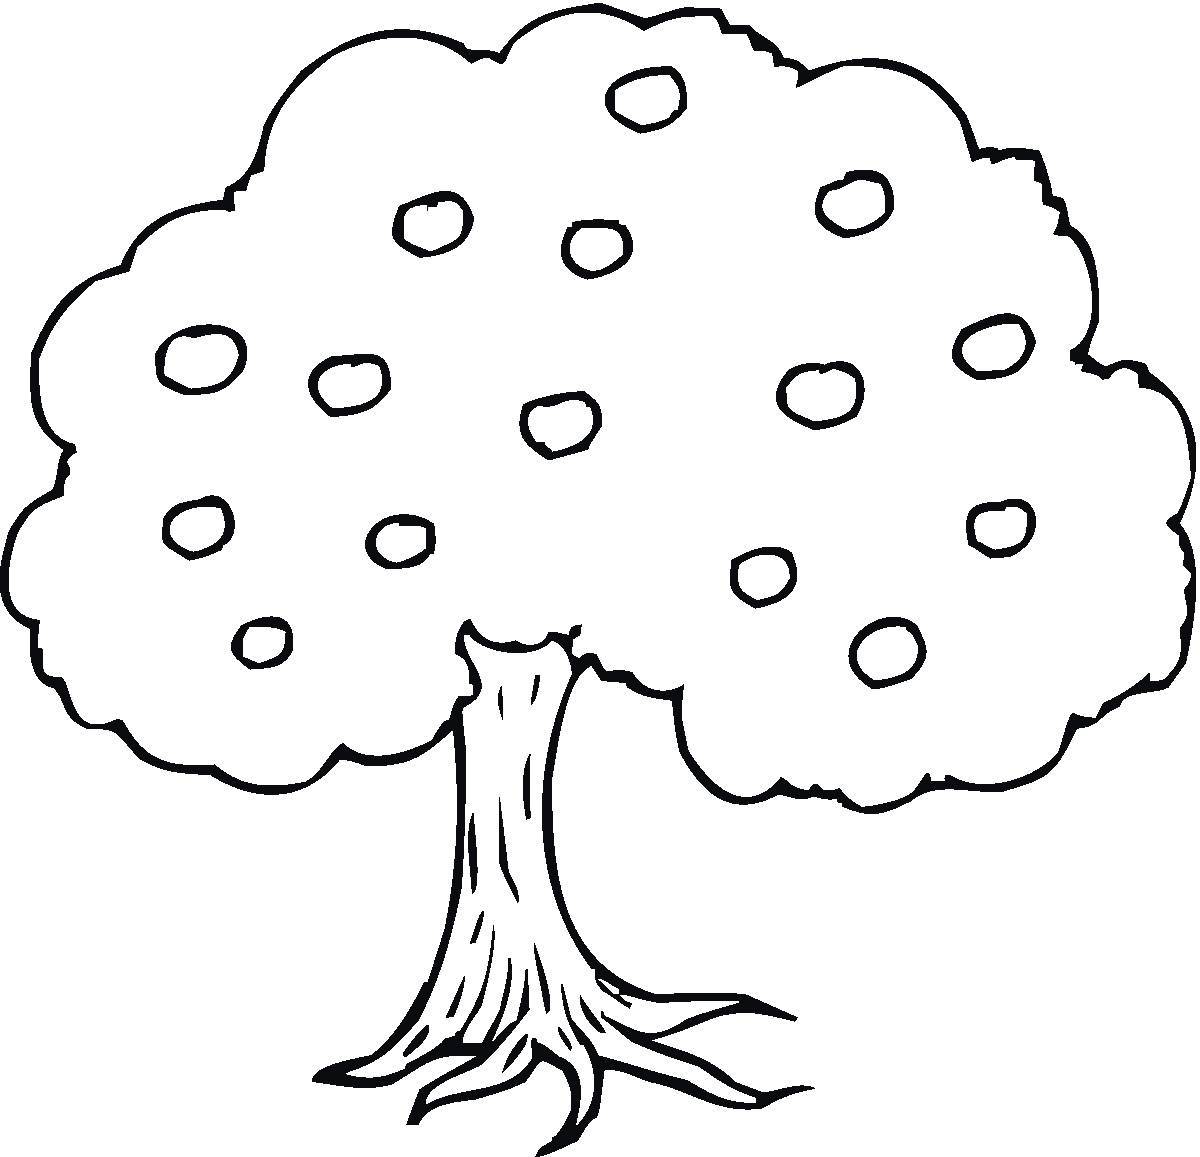 Gorgeous tree coloring book for kids